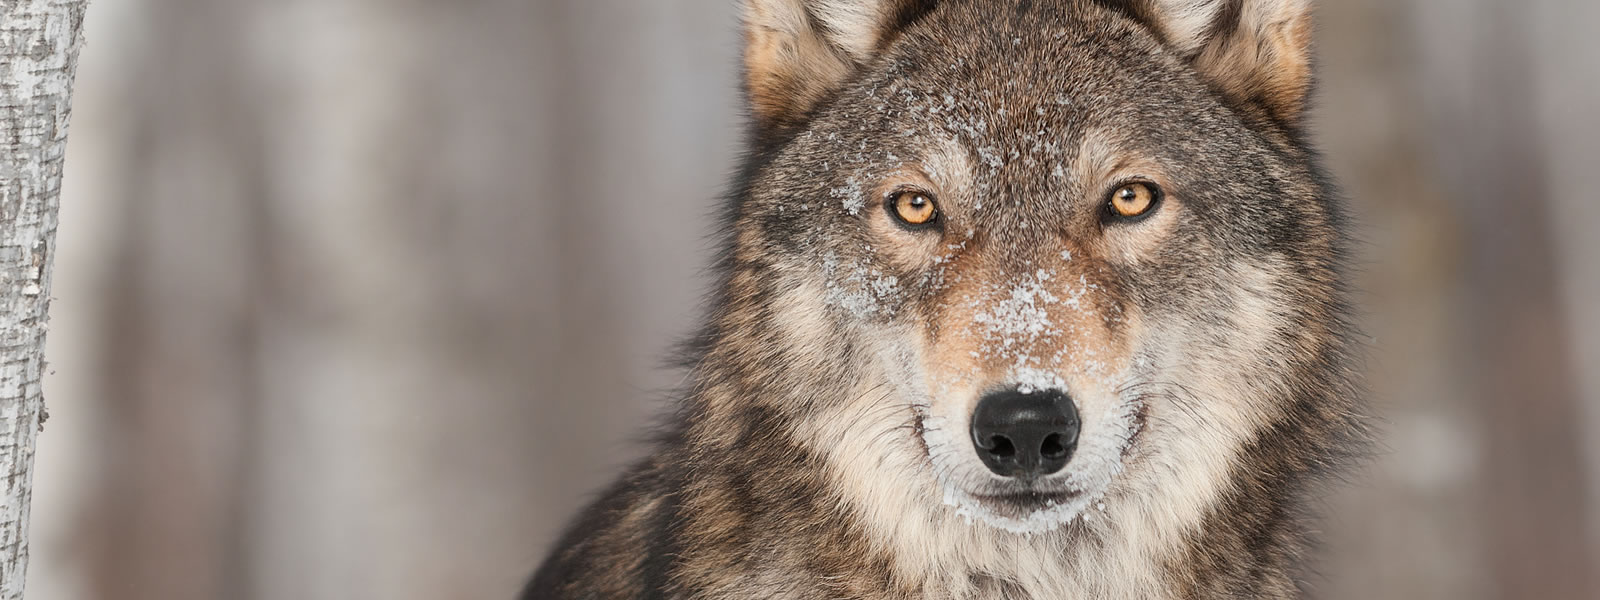 A close-up portrait of a gray wolf, Canis lupus